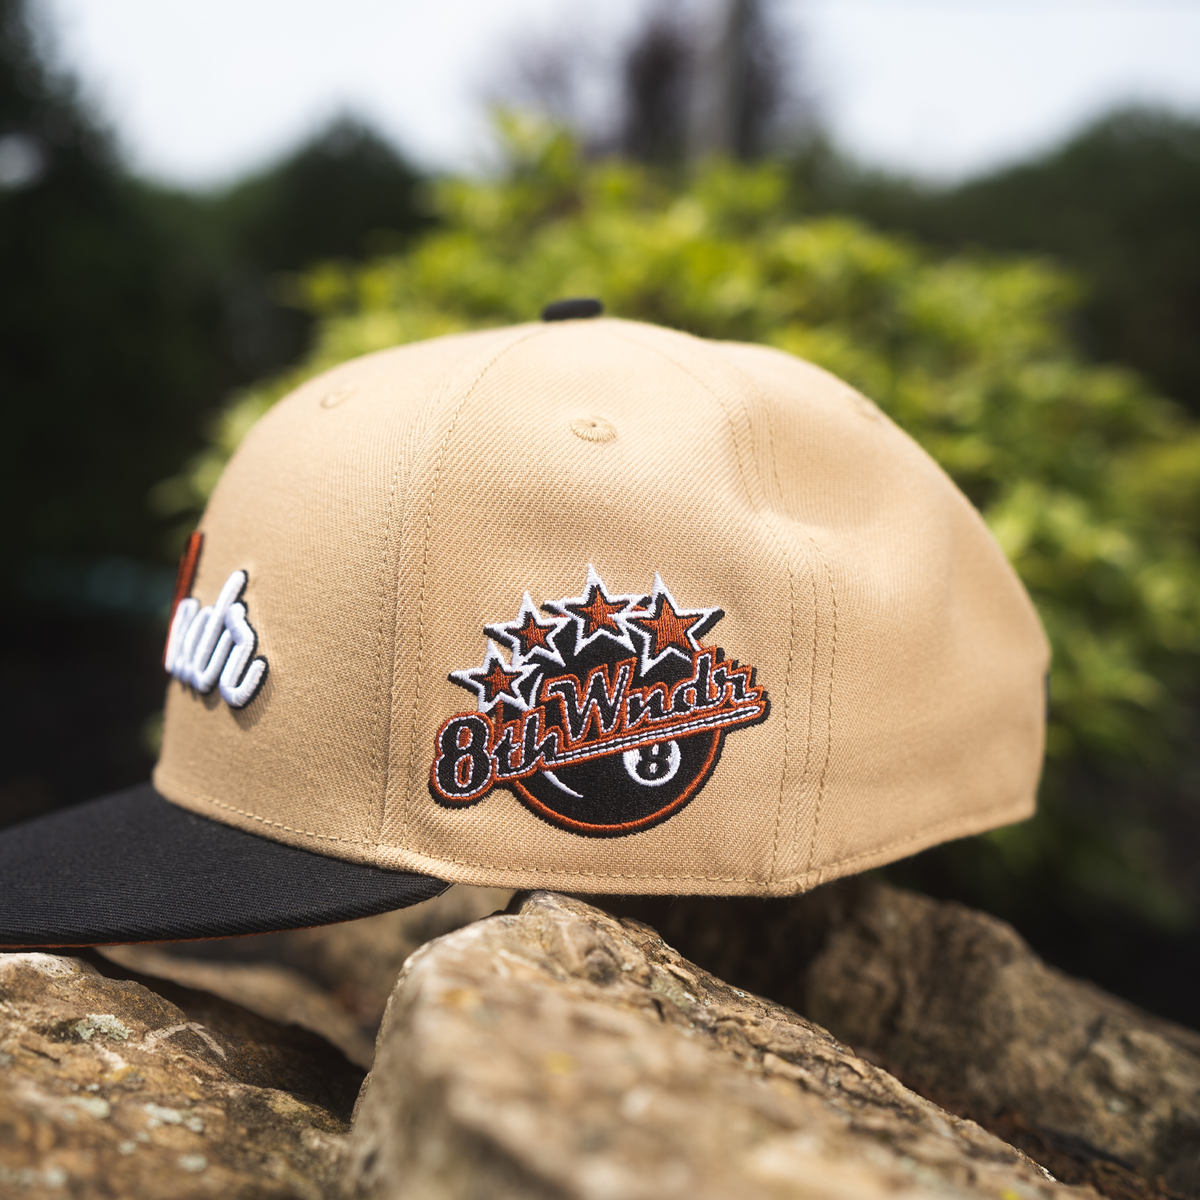 Fitted Hat Copper / Black - 7 1/8